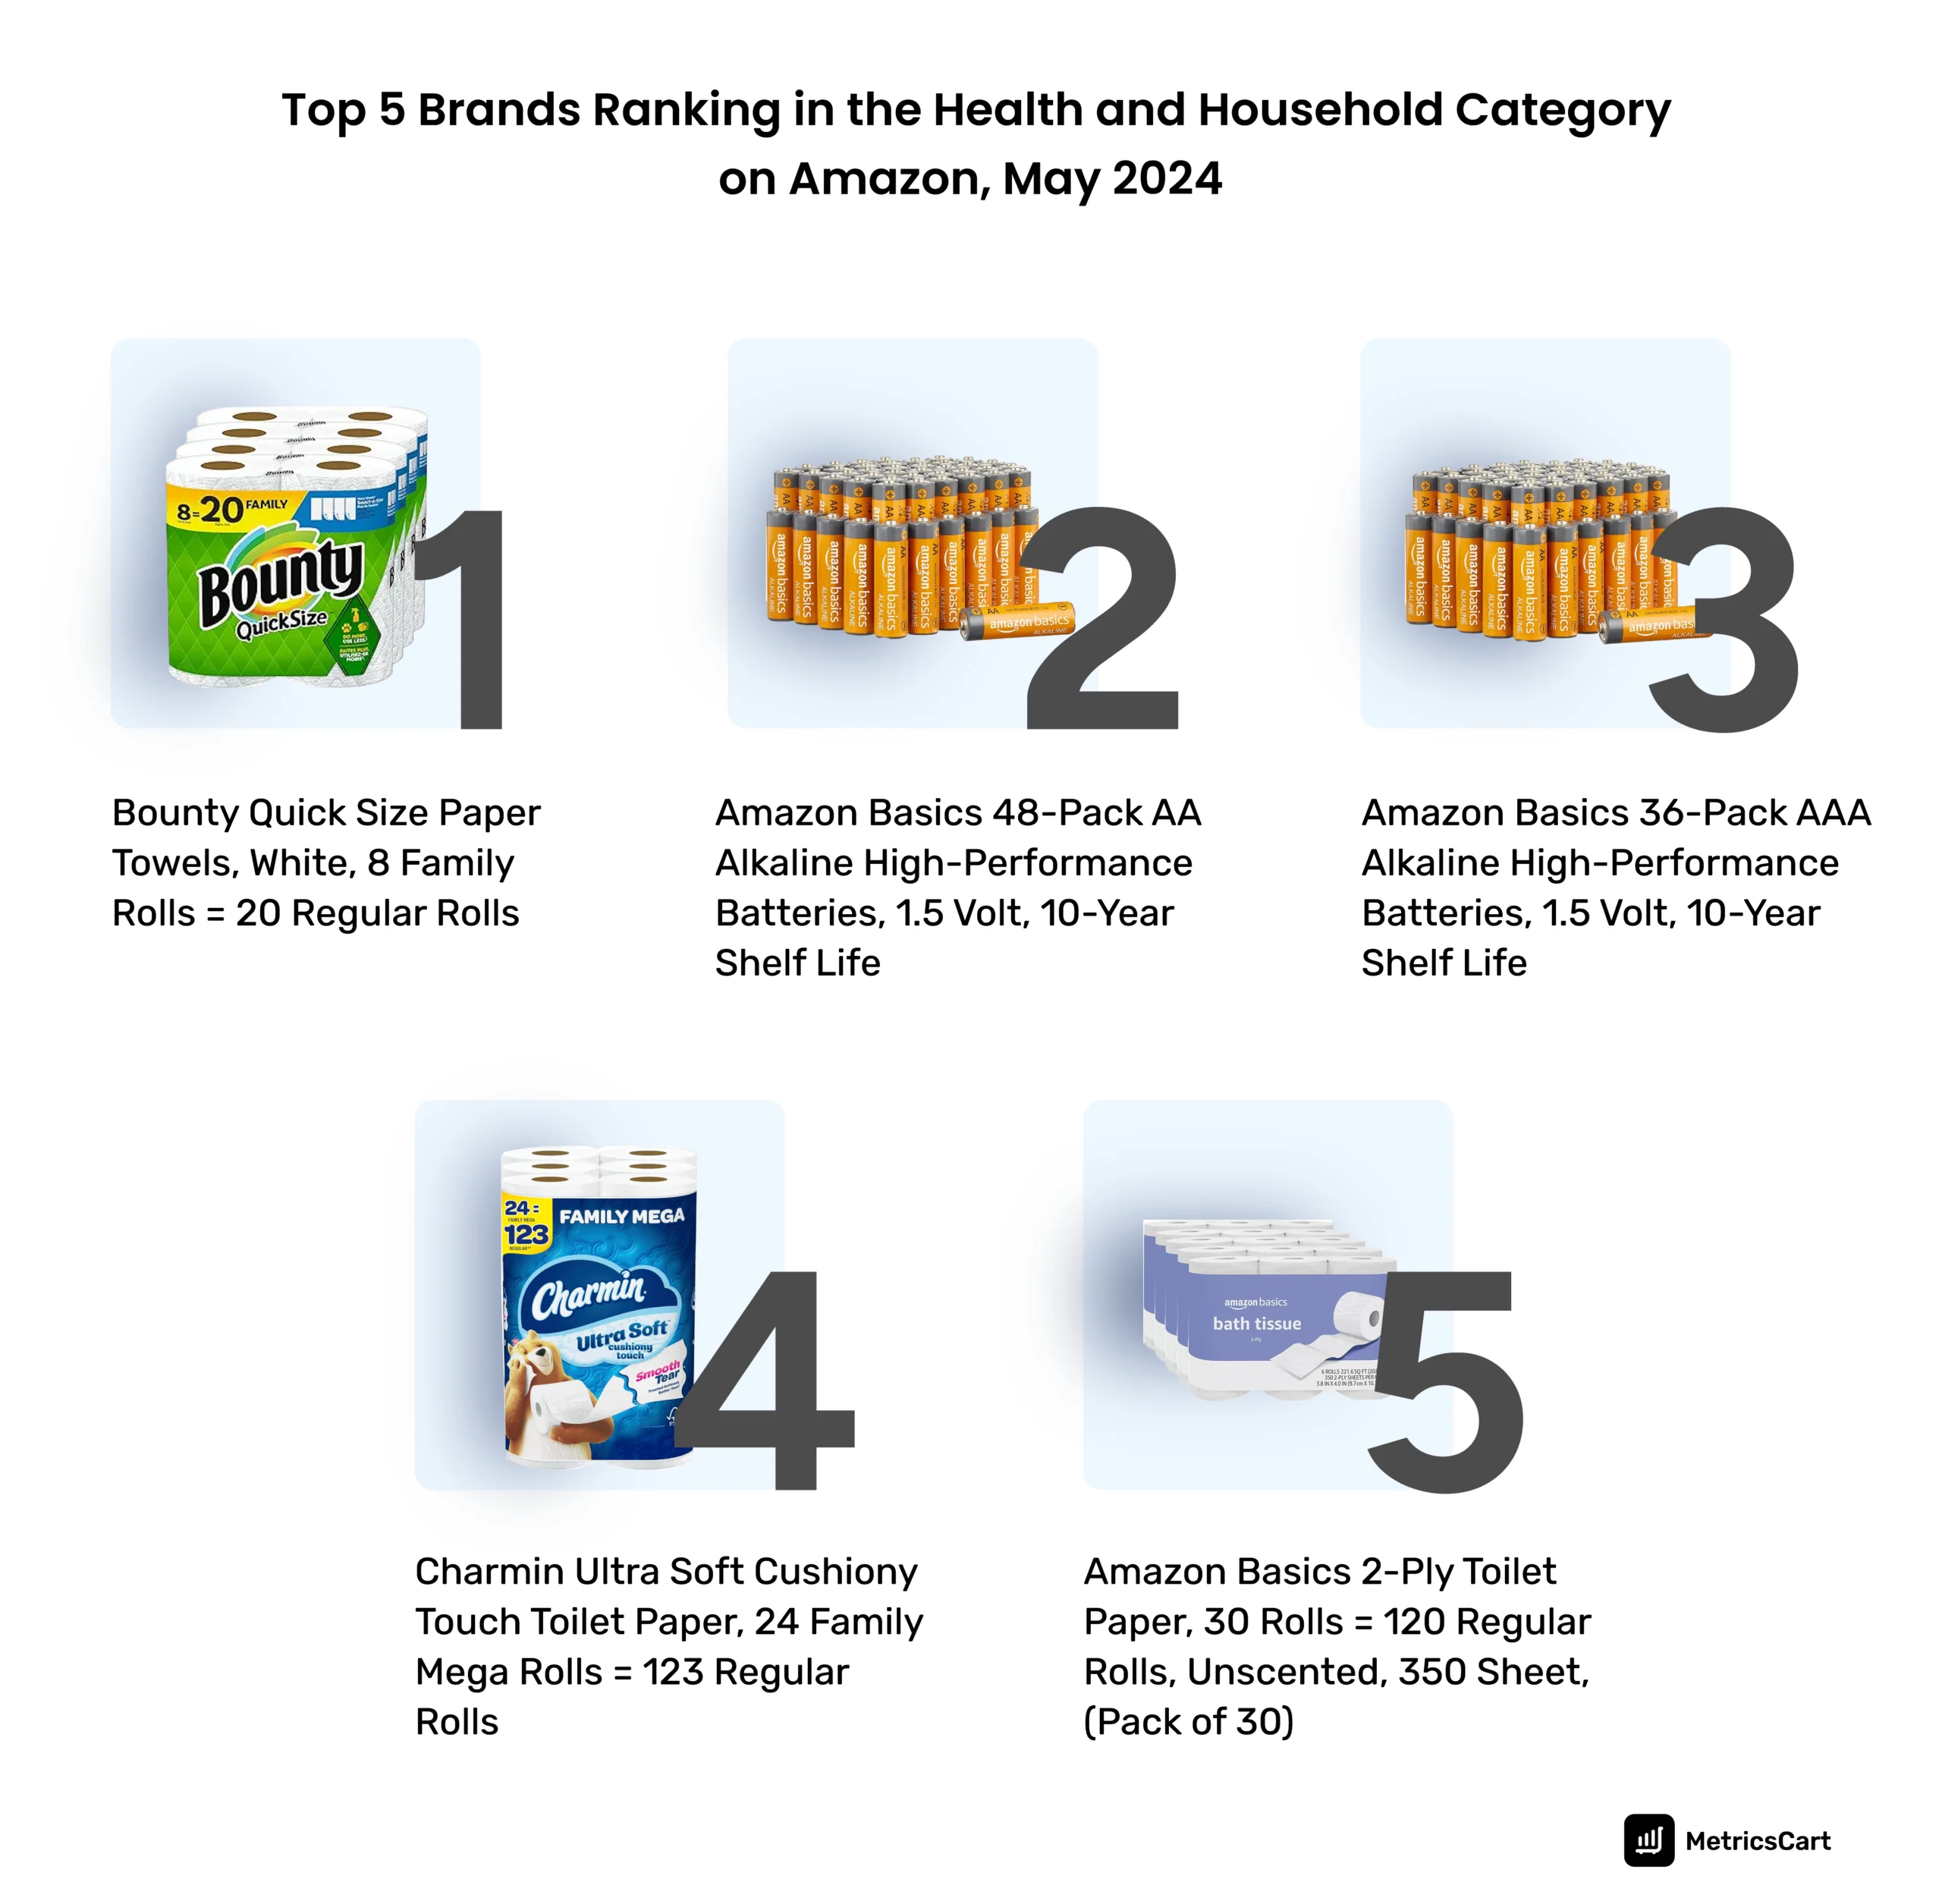 the image shows the 5 top ranking brands in the health and household category on Amazon in 2024